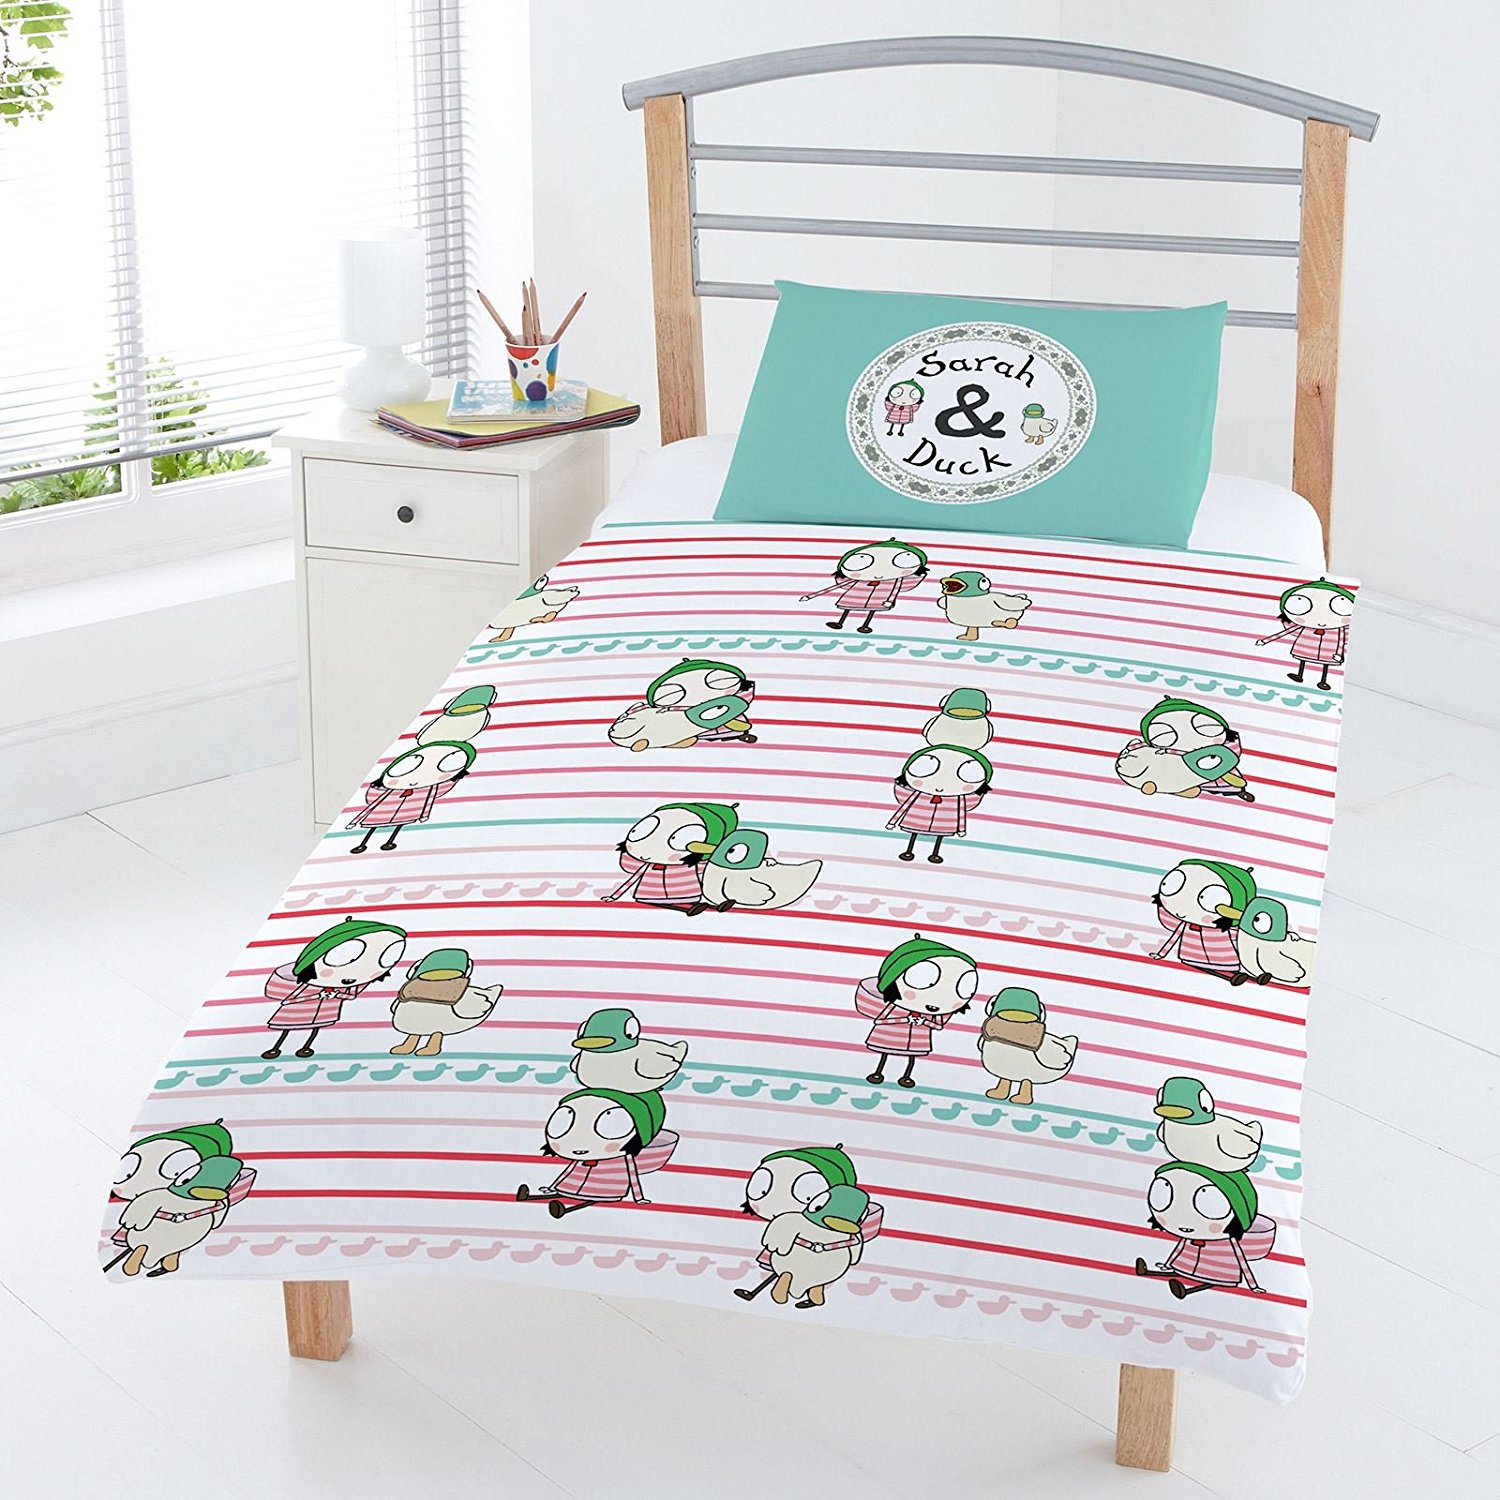 Sarah & Duck 'Red Stripe' Reversible Rotary Junior Cot Bed Duvet Quilt Cover Set